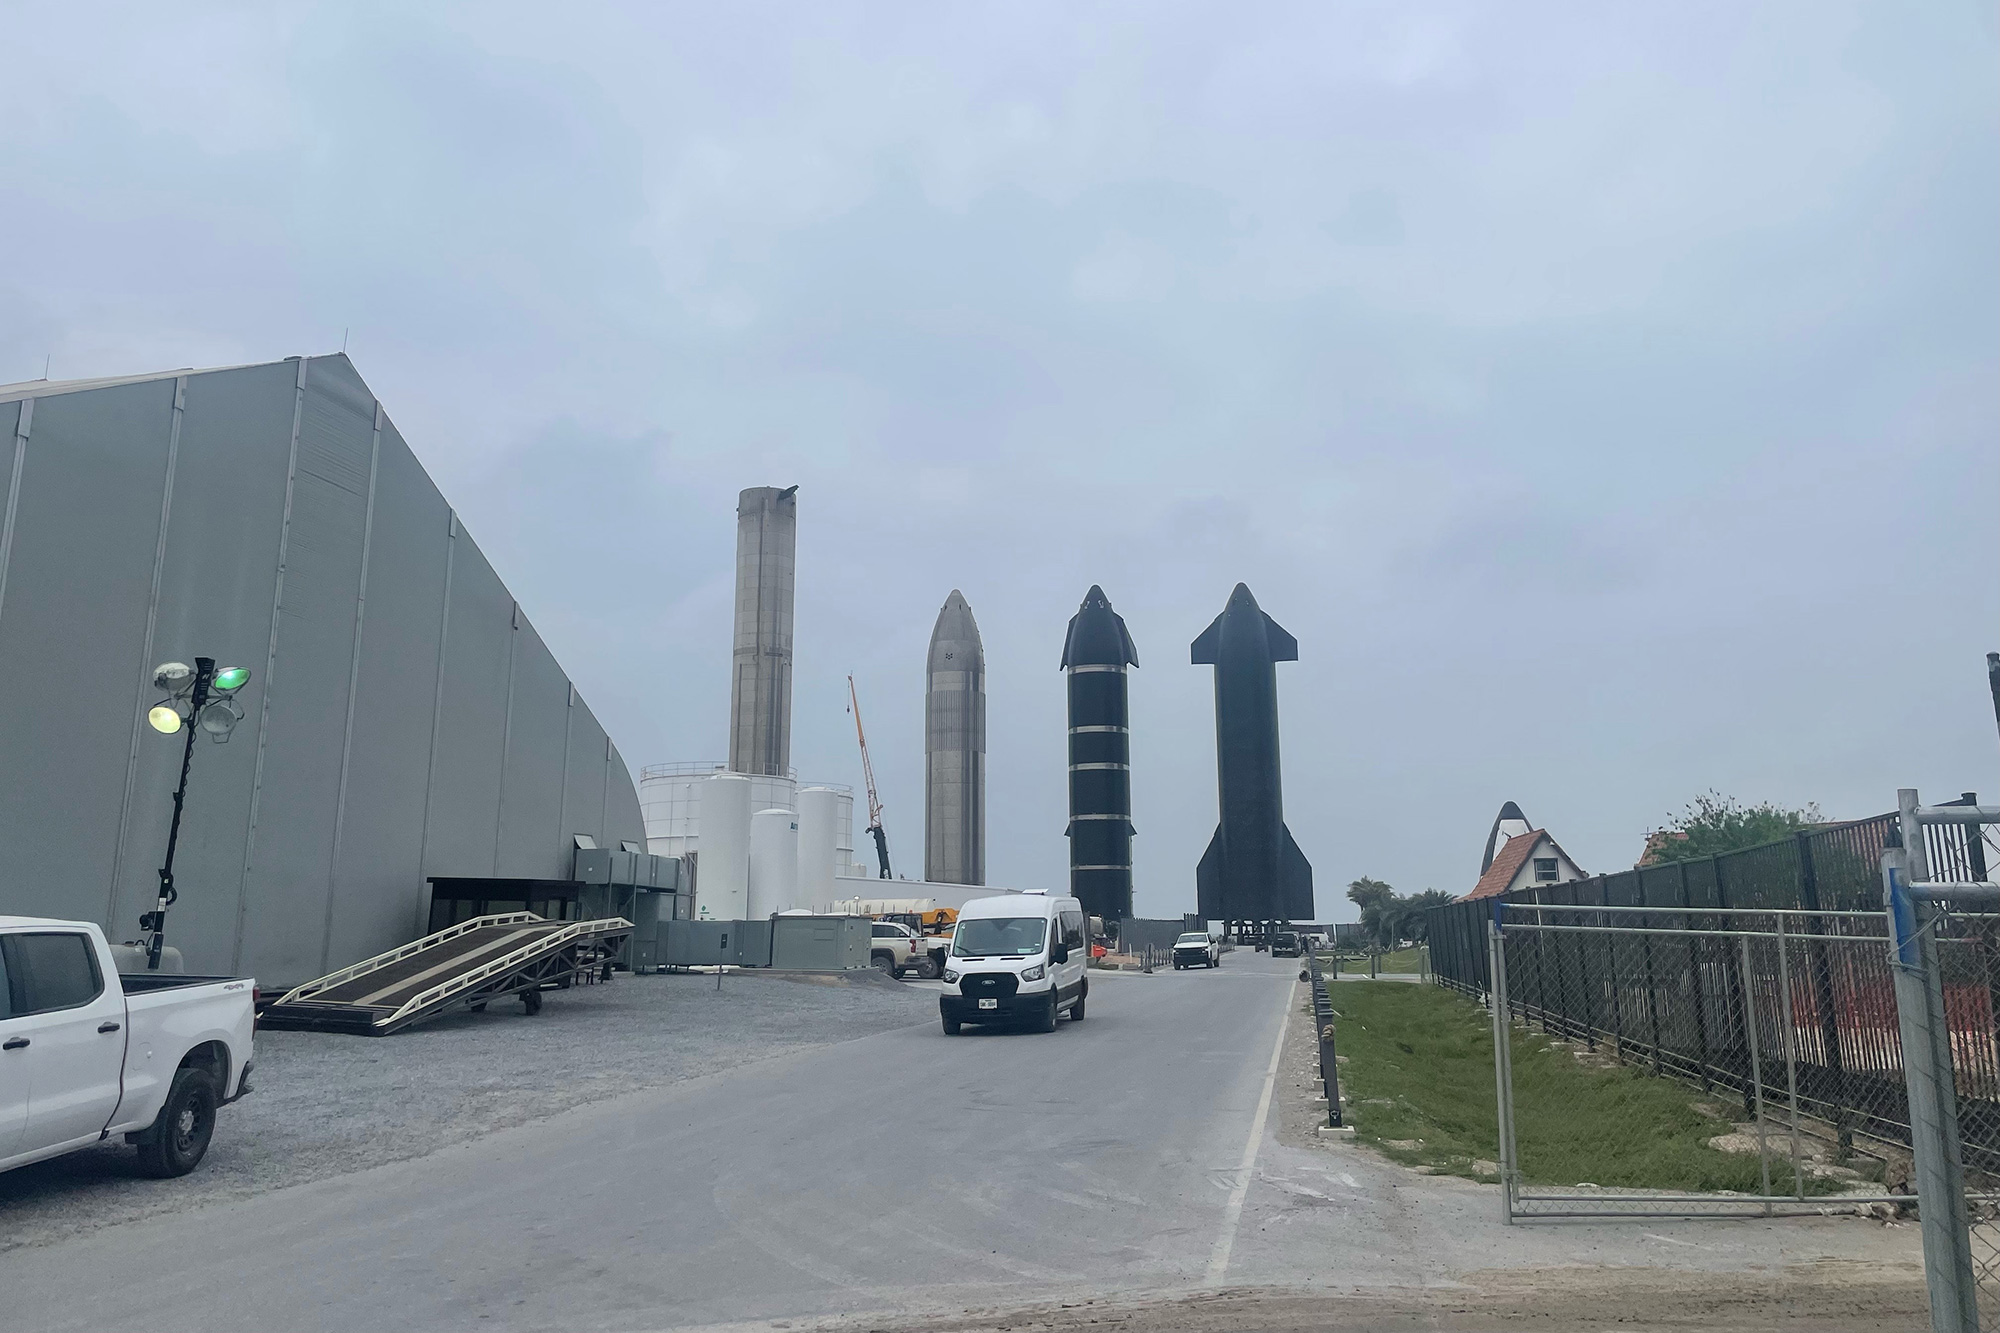 A rocket booster and three Starship spacecraft are lined up near massive assembly buildings at SpaceX's Starbase fascilities in South Texas.